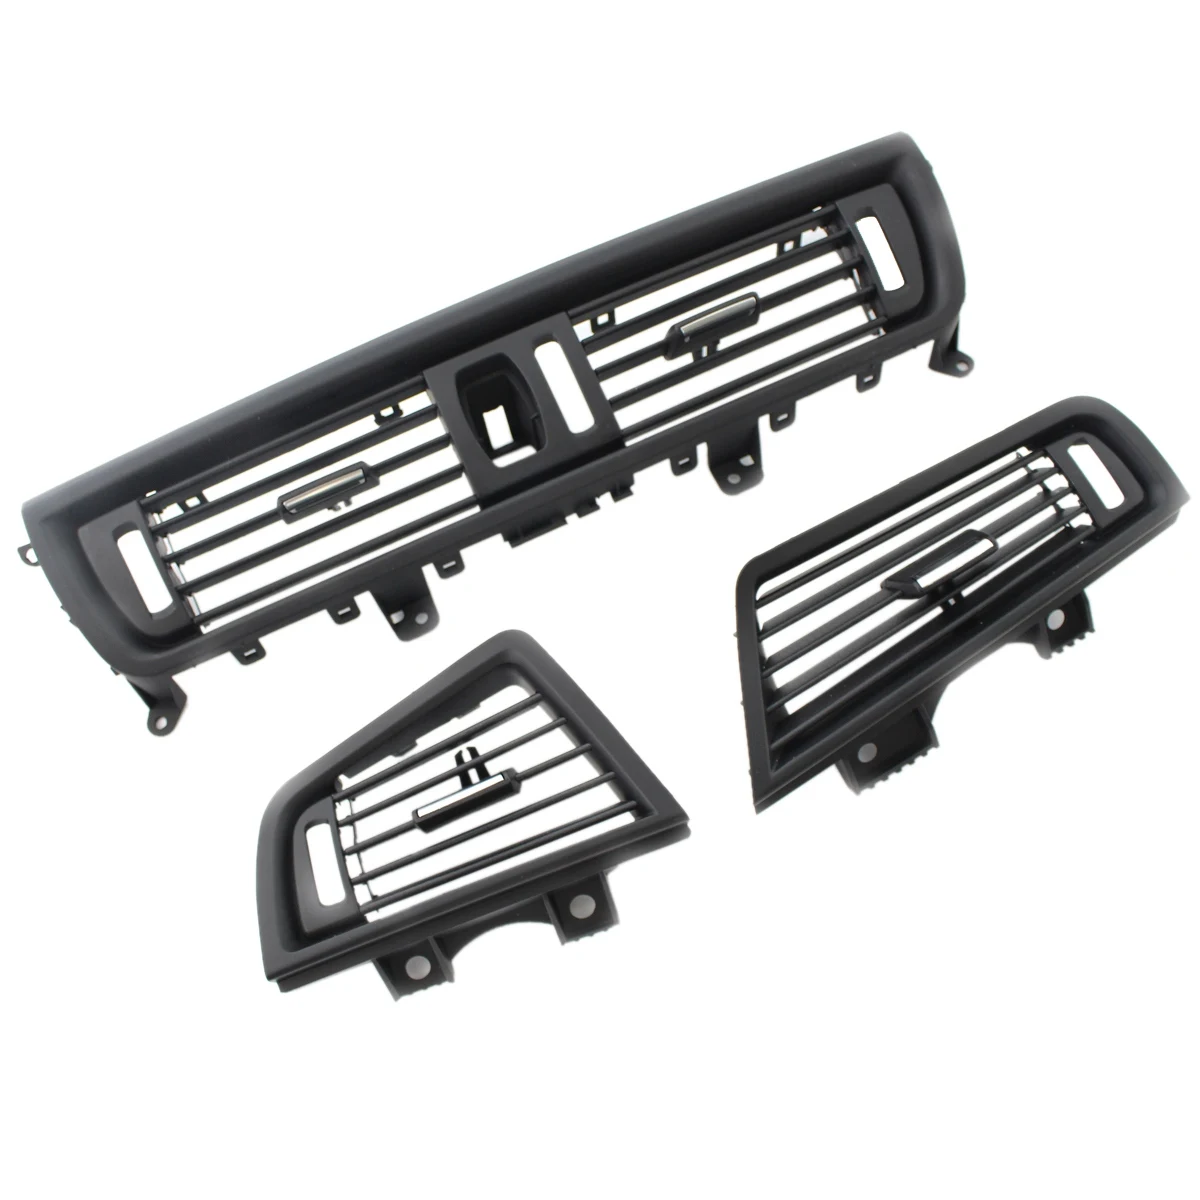 

3 Pcs Front Console Air Conditioning AC Vent Outlet Grille Set For-BMW 5 Series F10 F11 F18 520I 523I 525I 528I